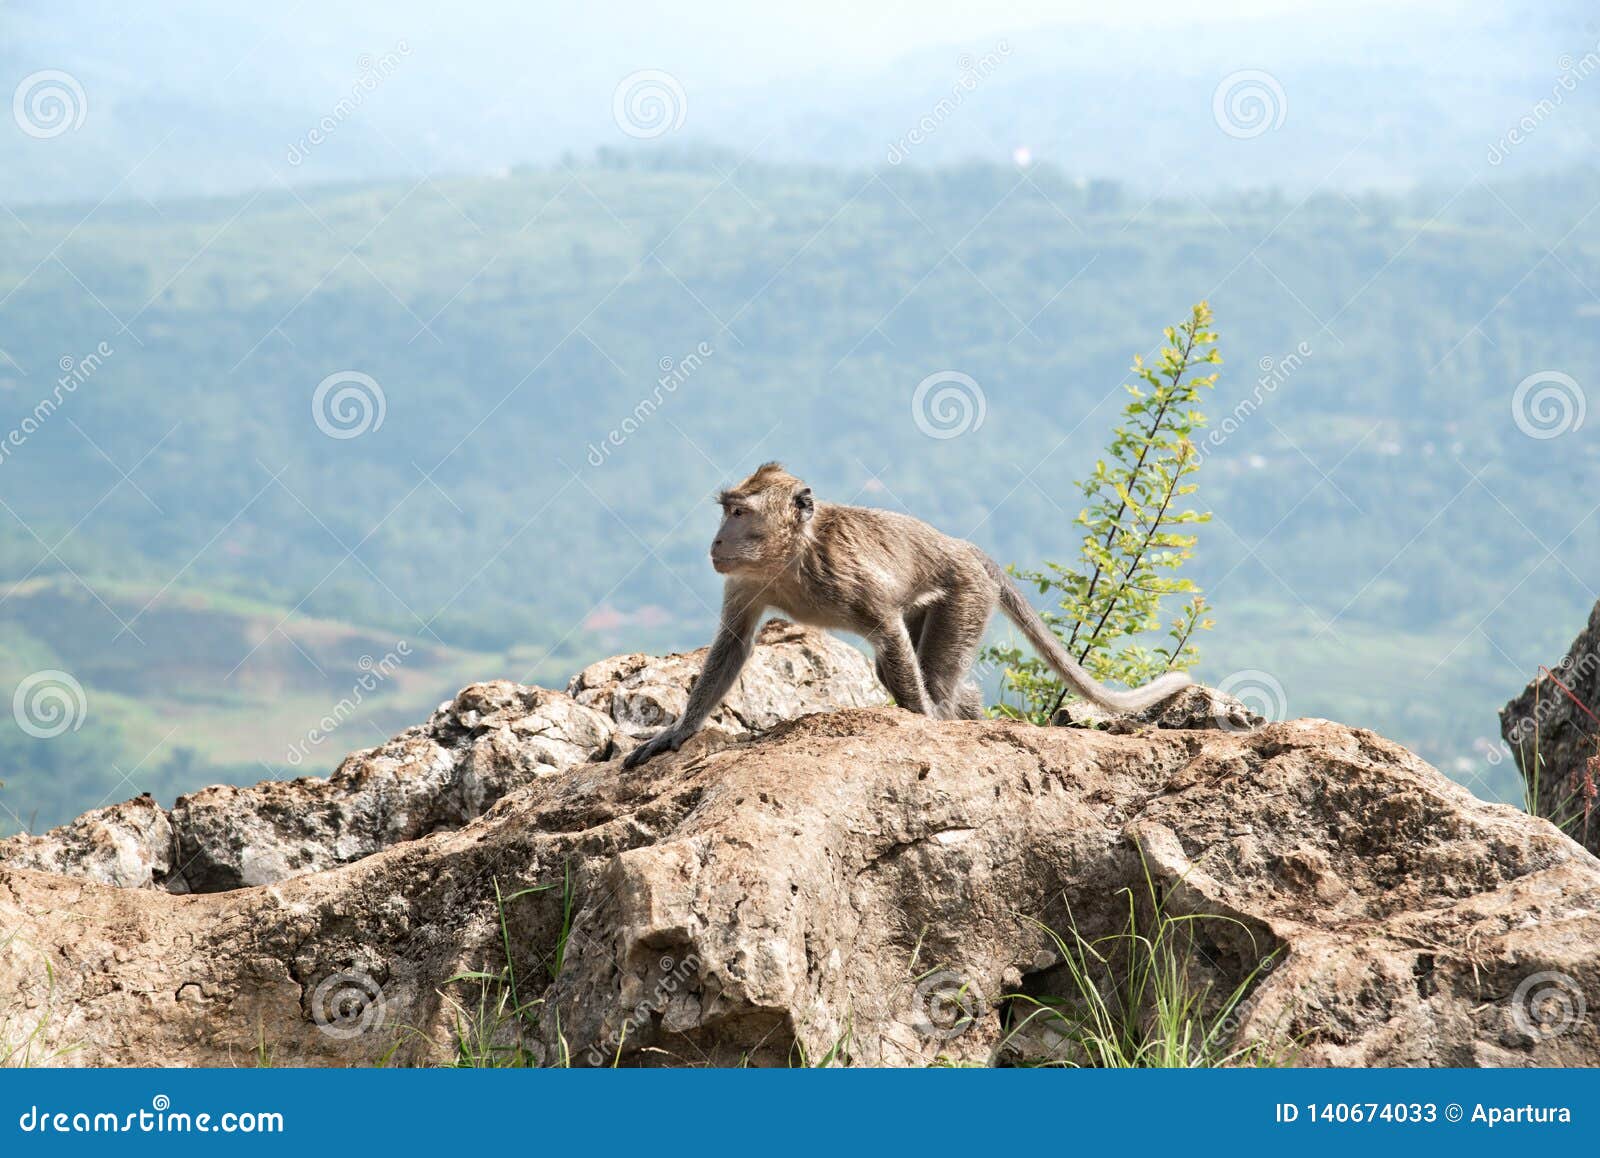 Lonely Long Tailed Macaque Monkey Walking on the Highest Top of Rock